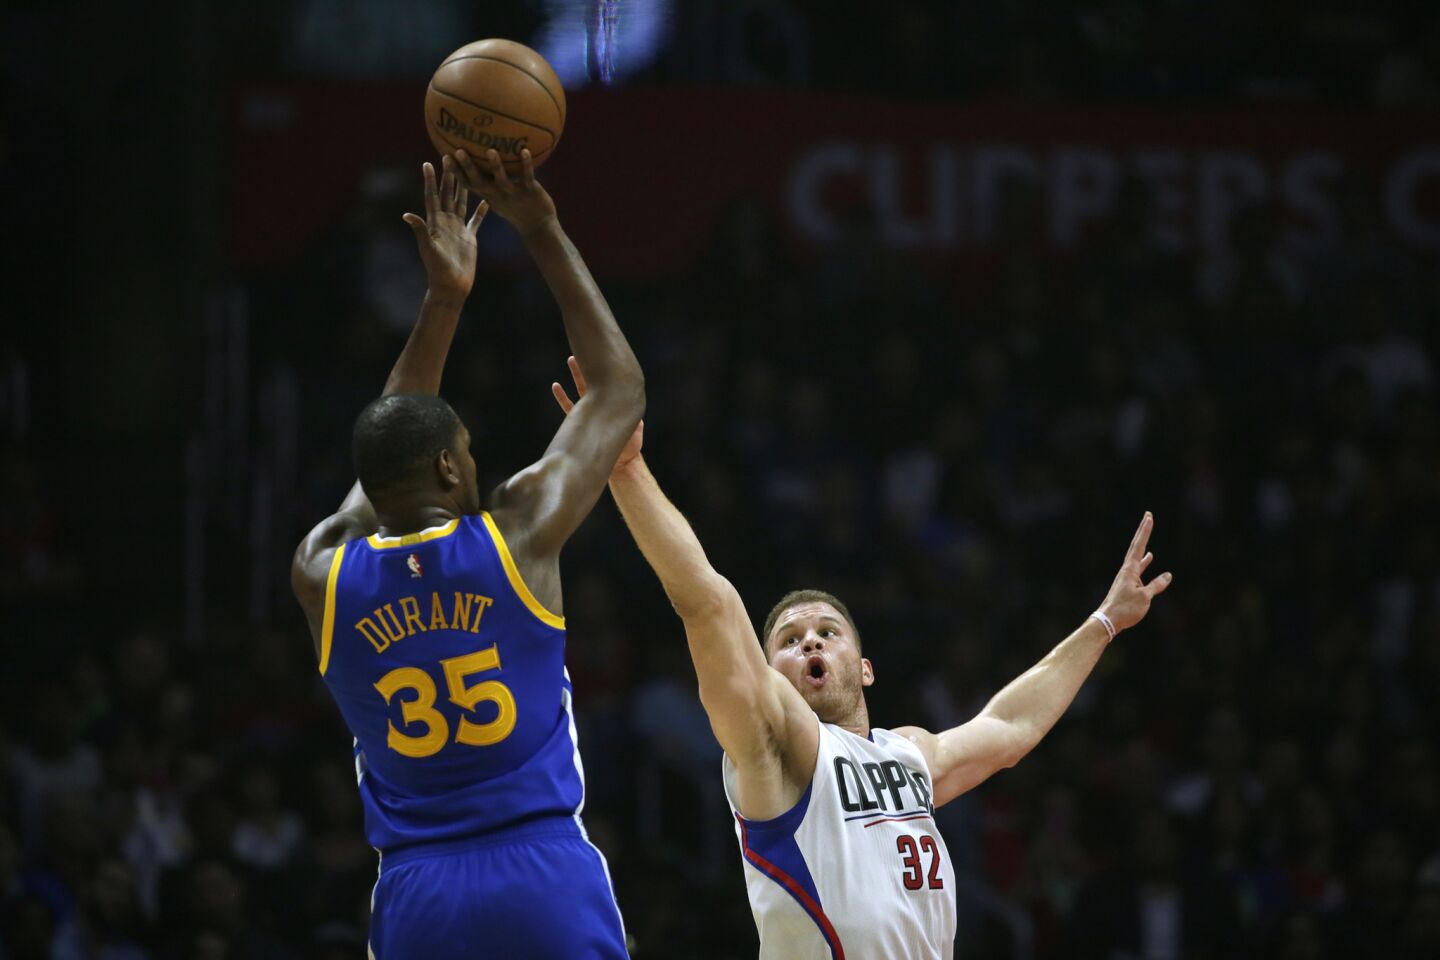 Warriors forward Kevin Durant shoots over Clippers forward Blake Griffin during first-half action.